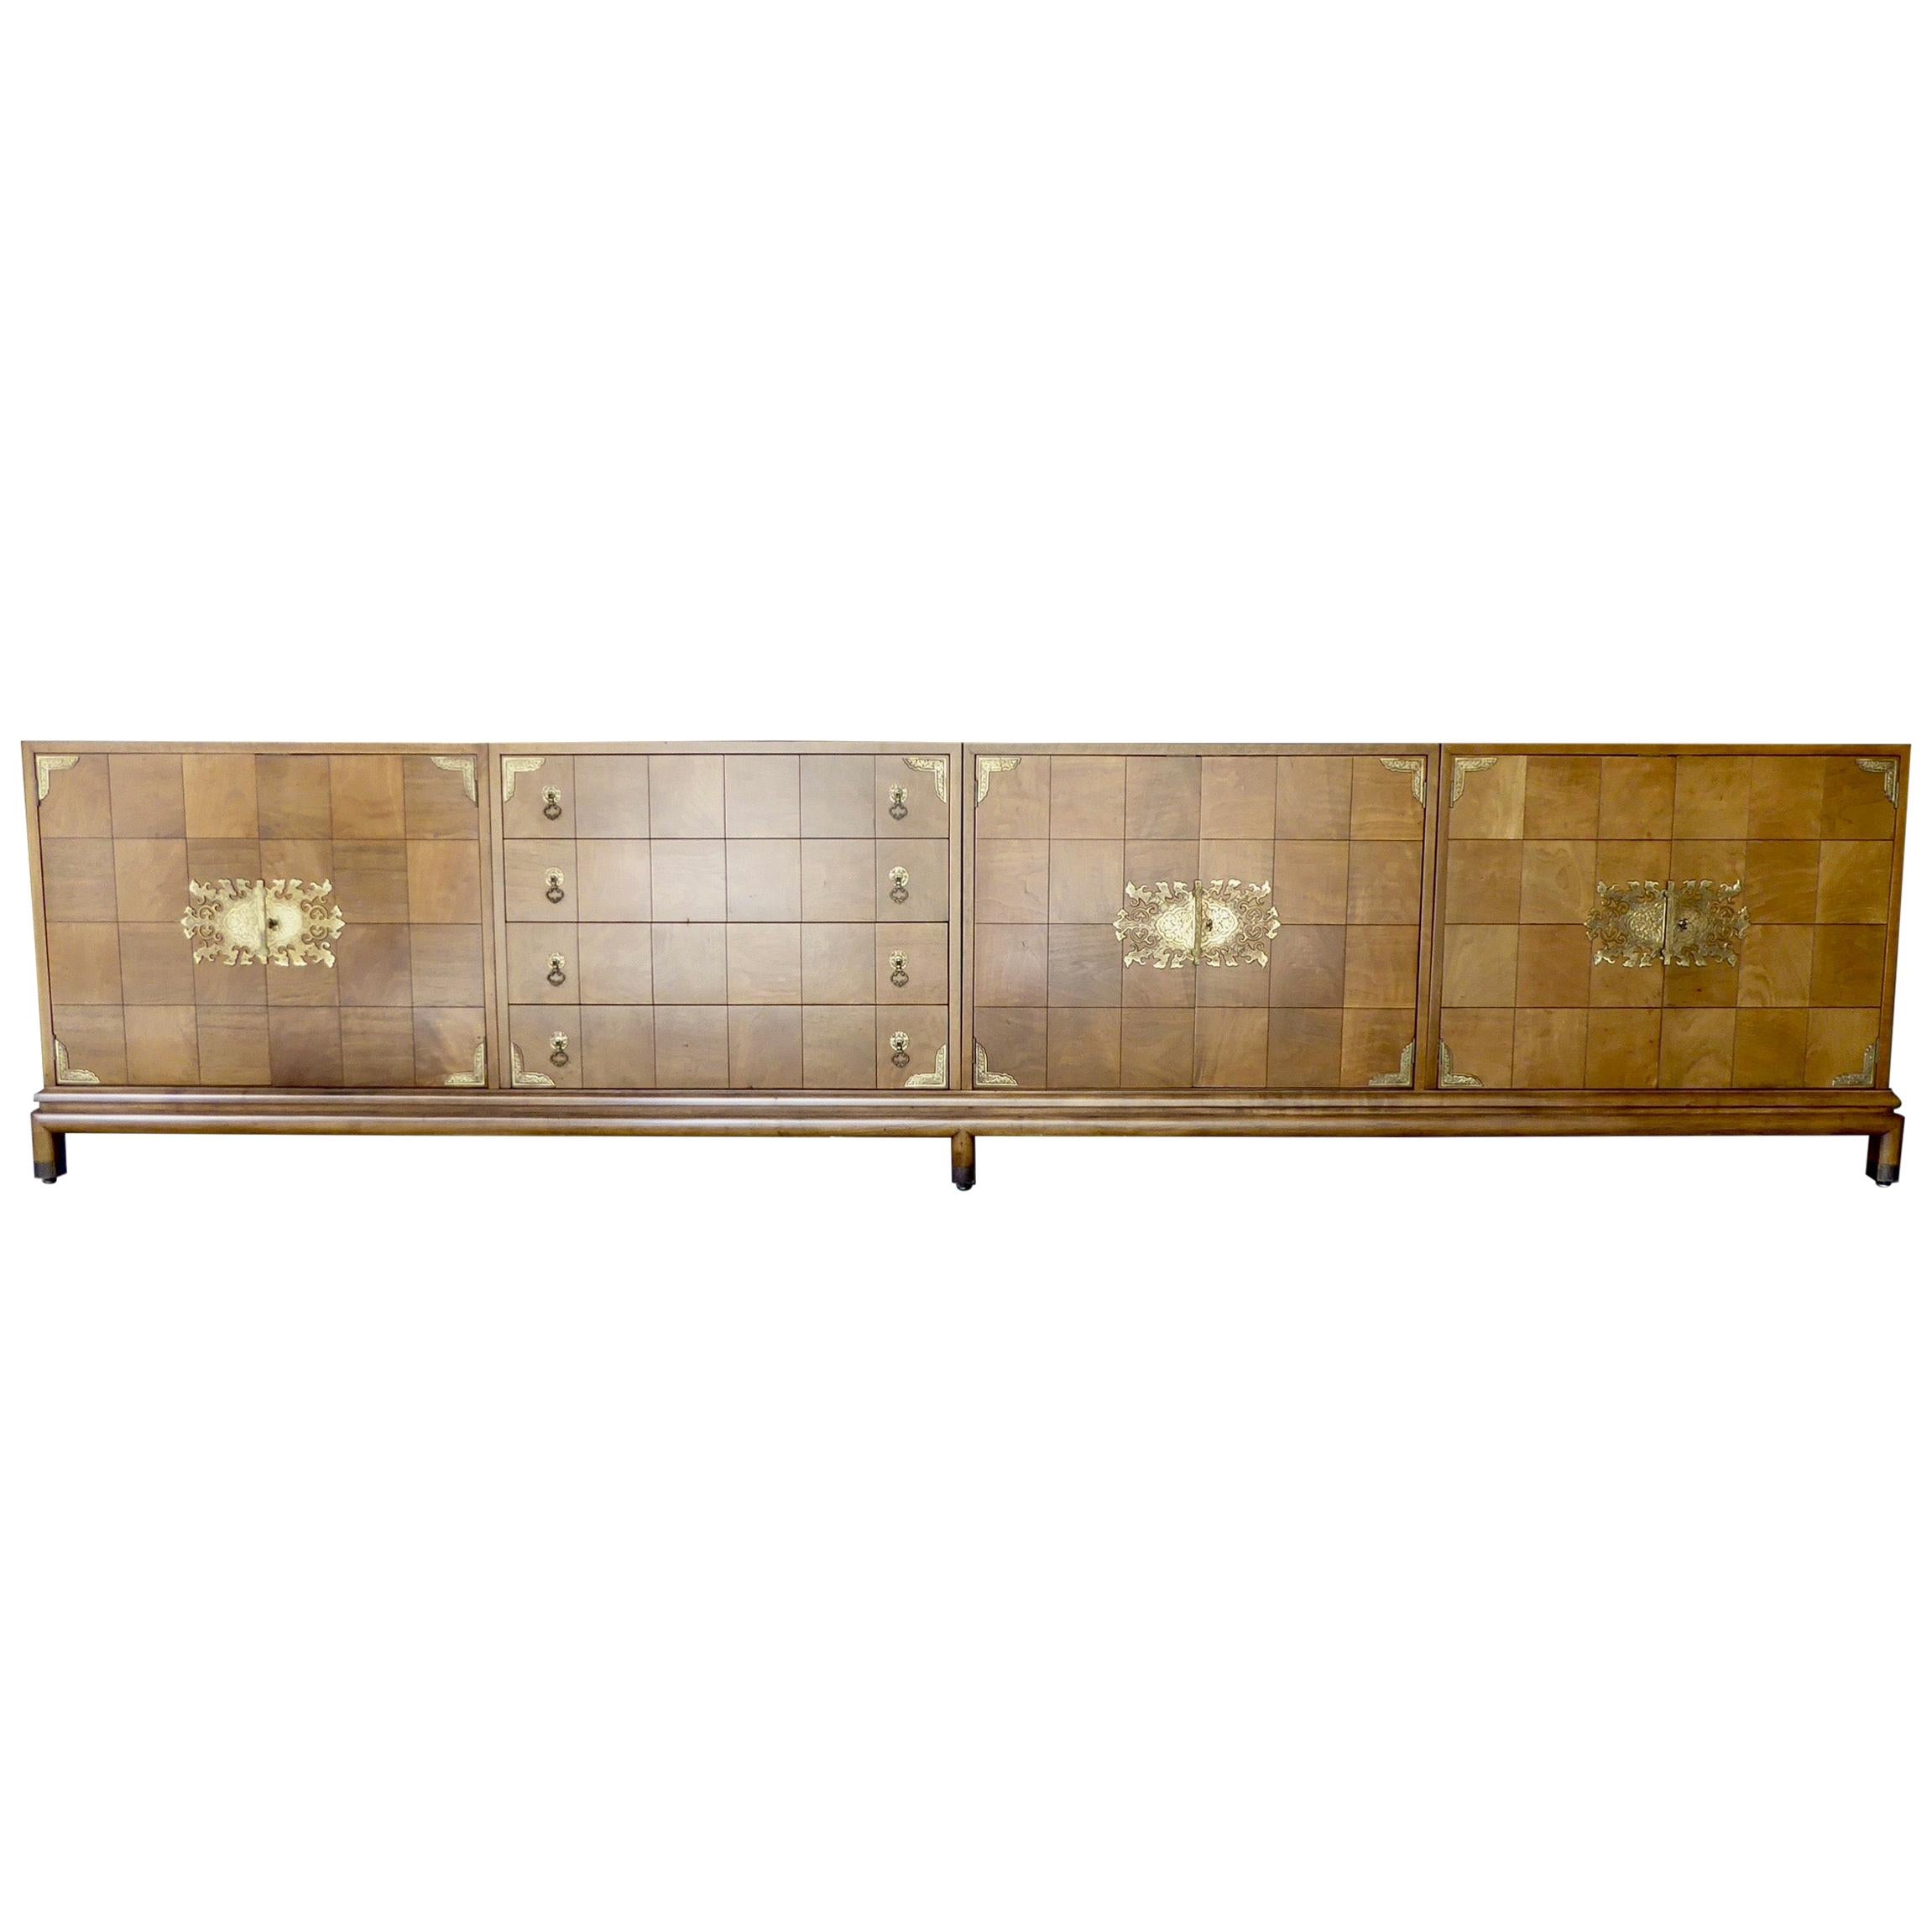 Monumentally Scaled Midcentury Credenza Designed by Renzo Rutili, circa 1960 For Sale